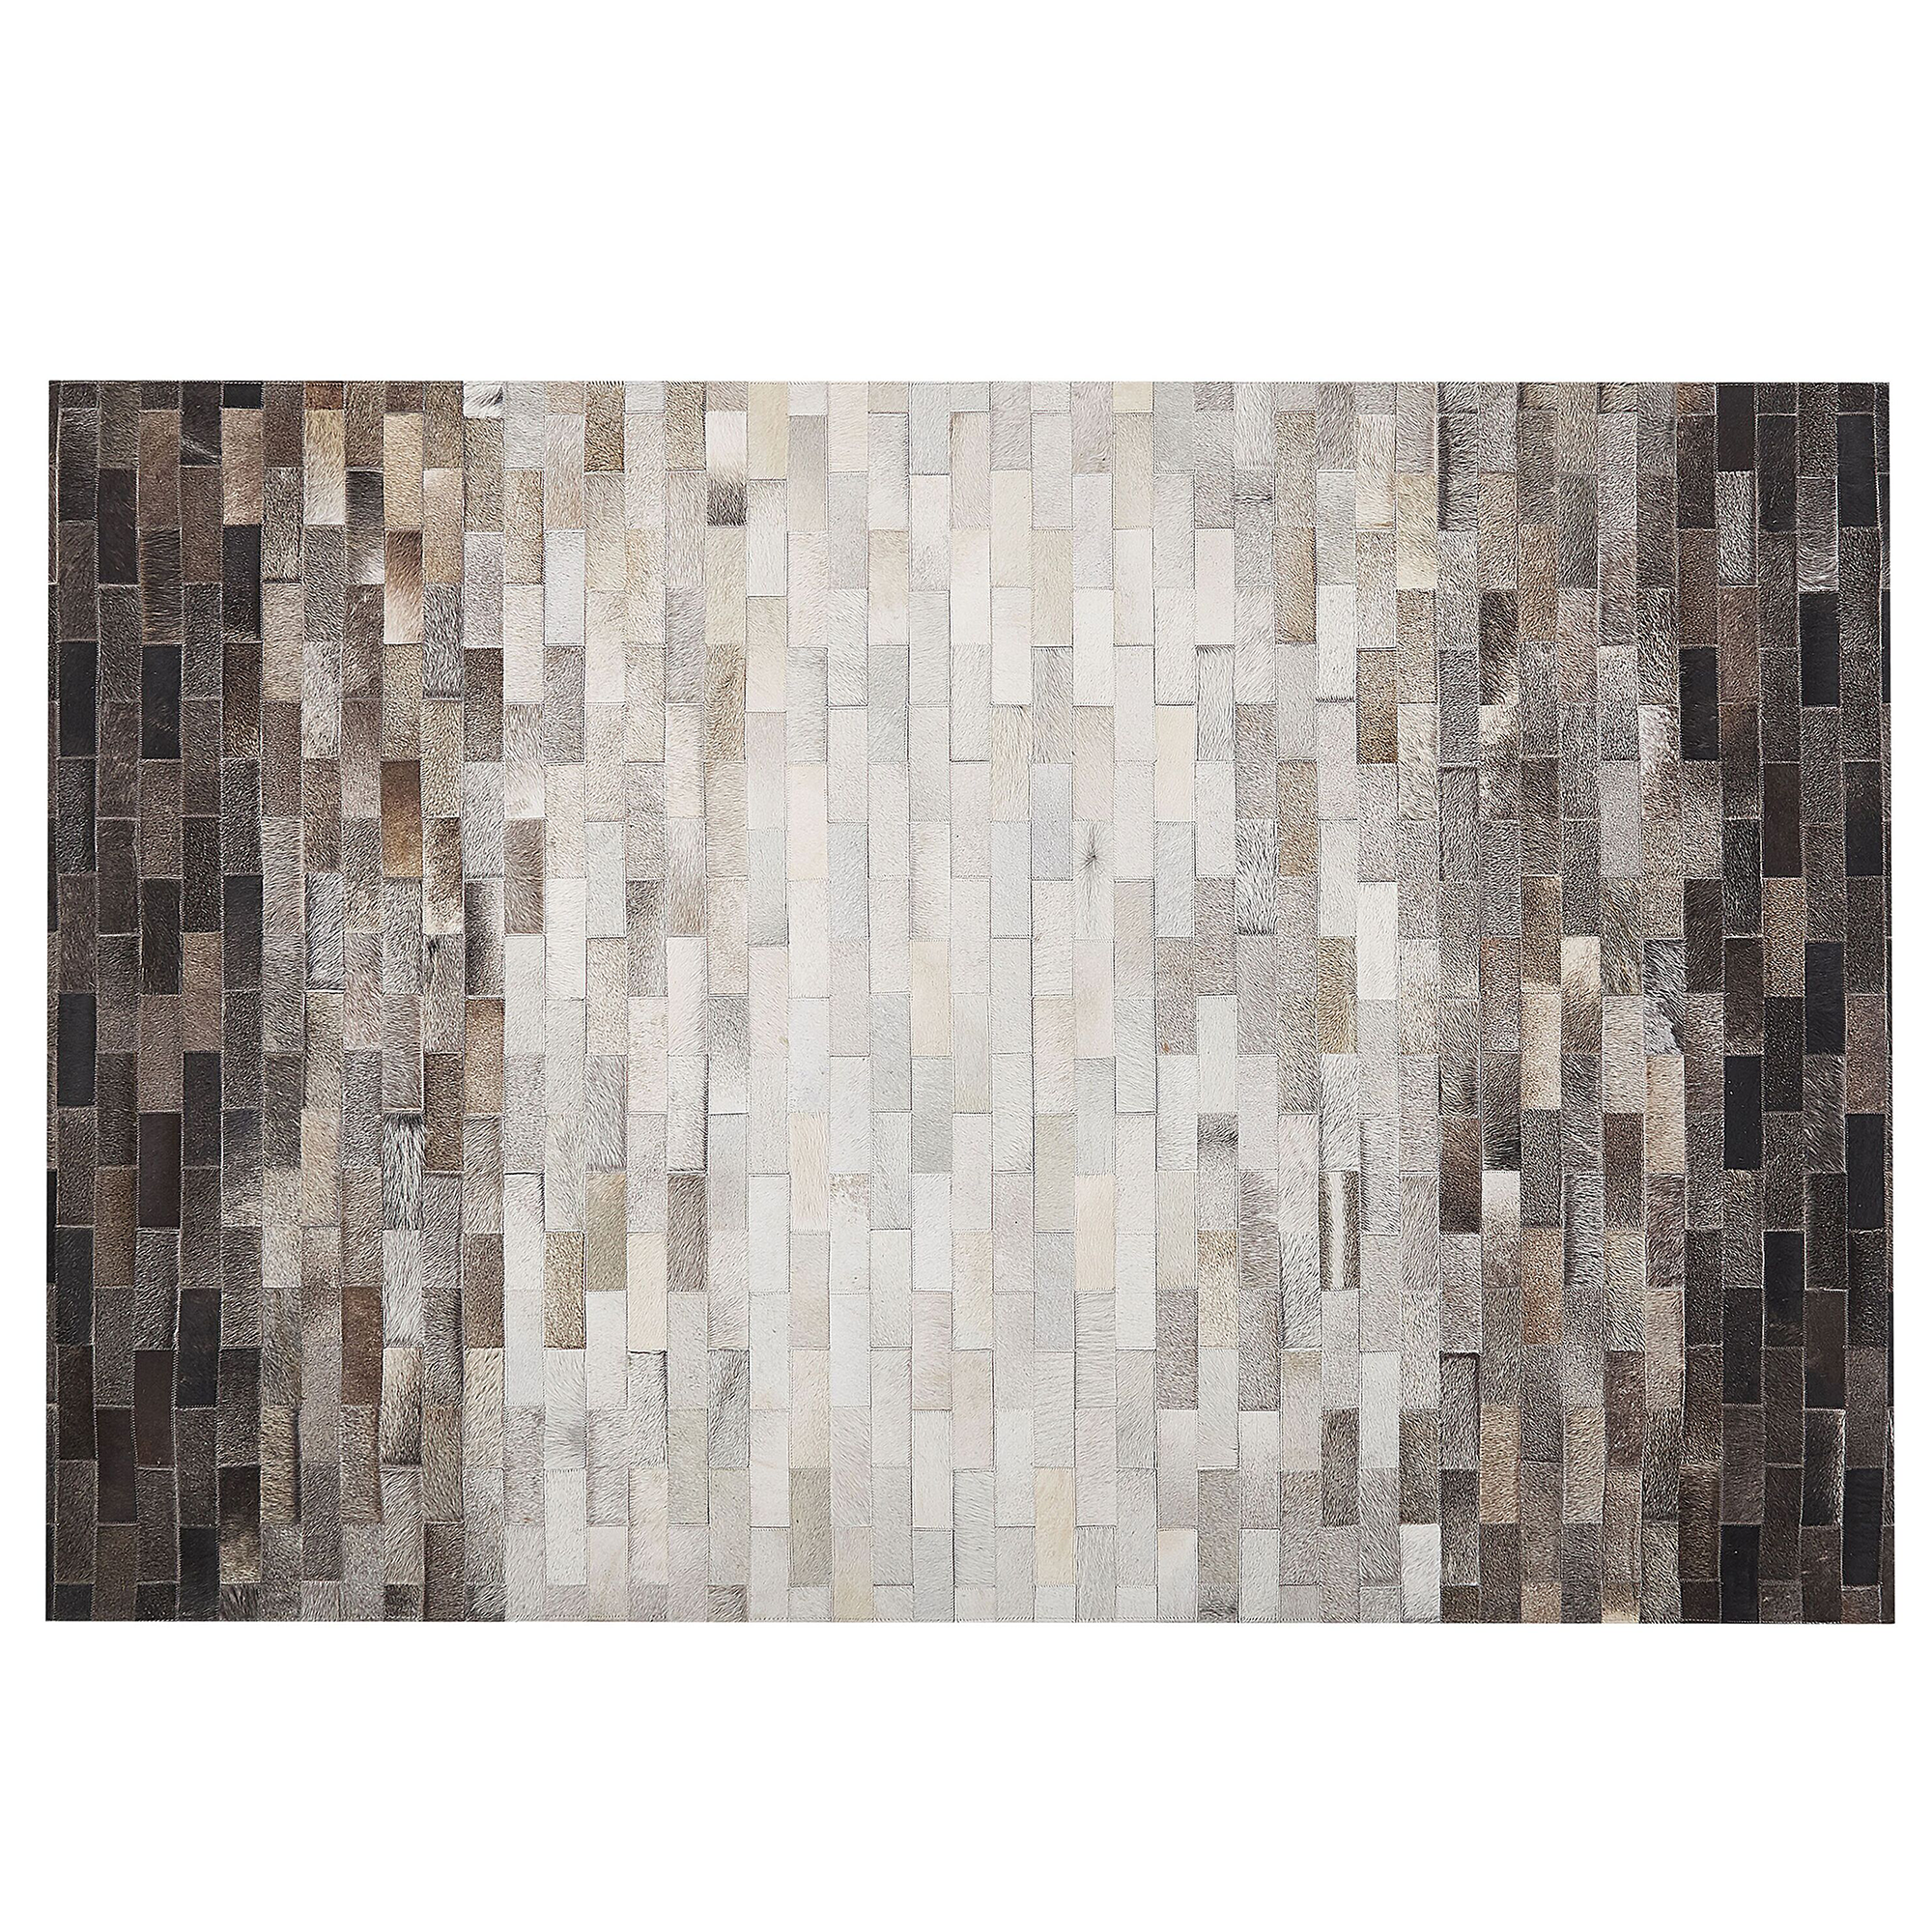 Beliani Rectangular Rug Brown and Beige Cowhide Leather 160 x 230 cm Patchwork Rectangles Rustic